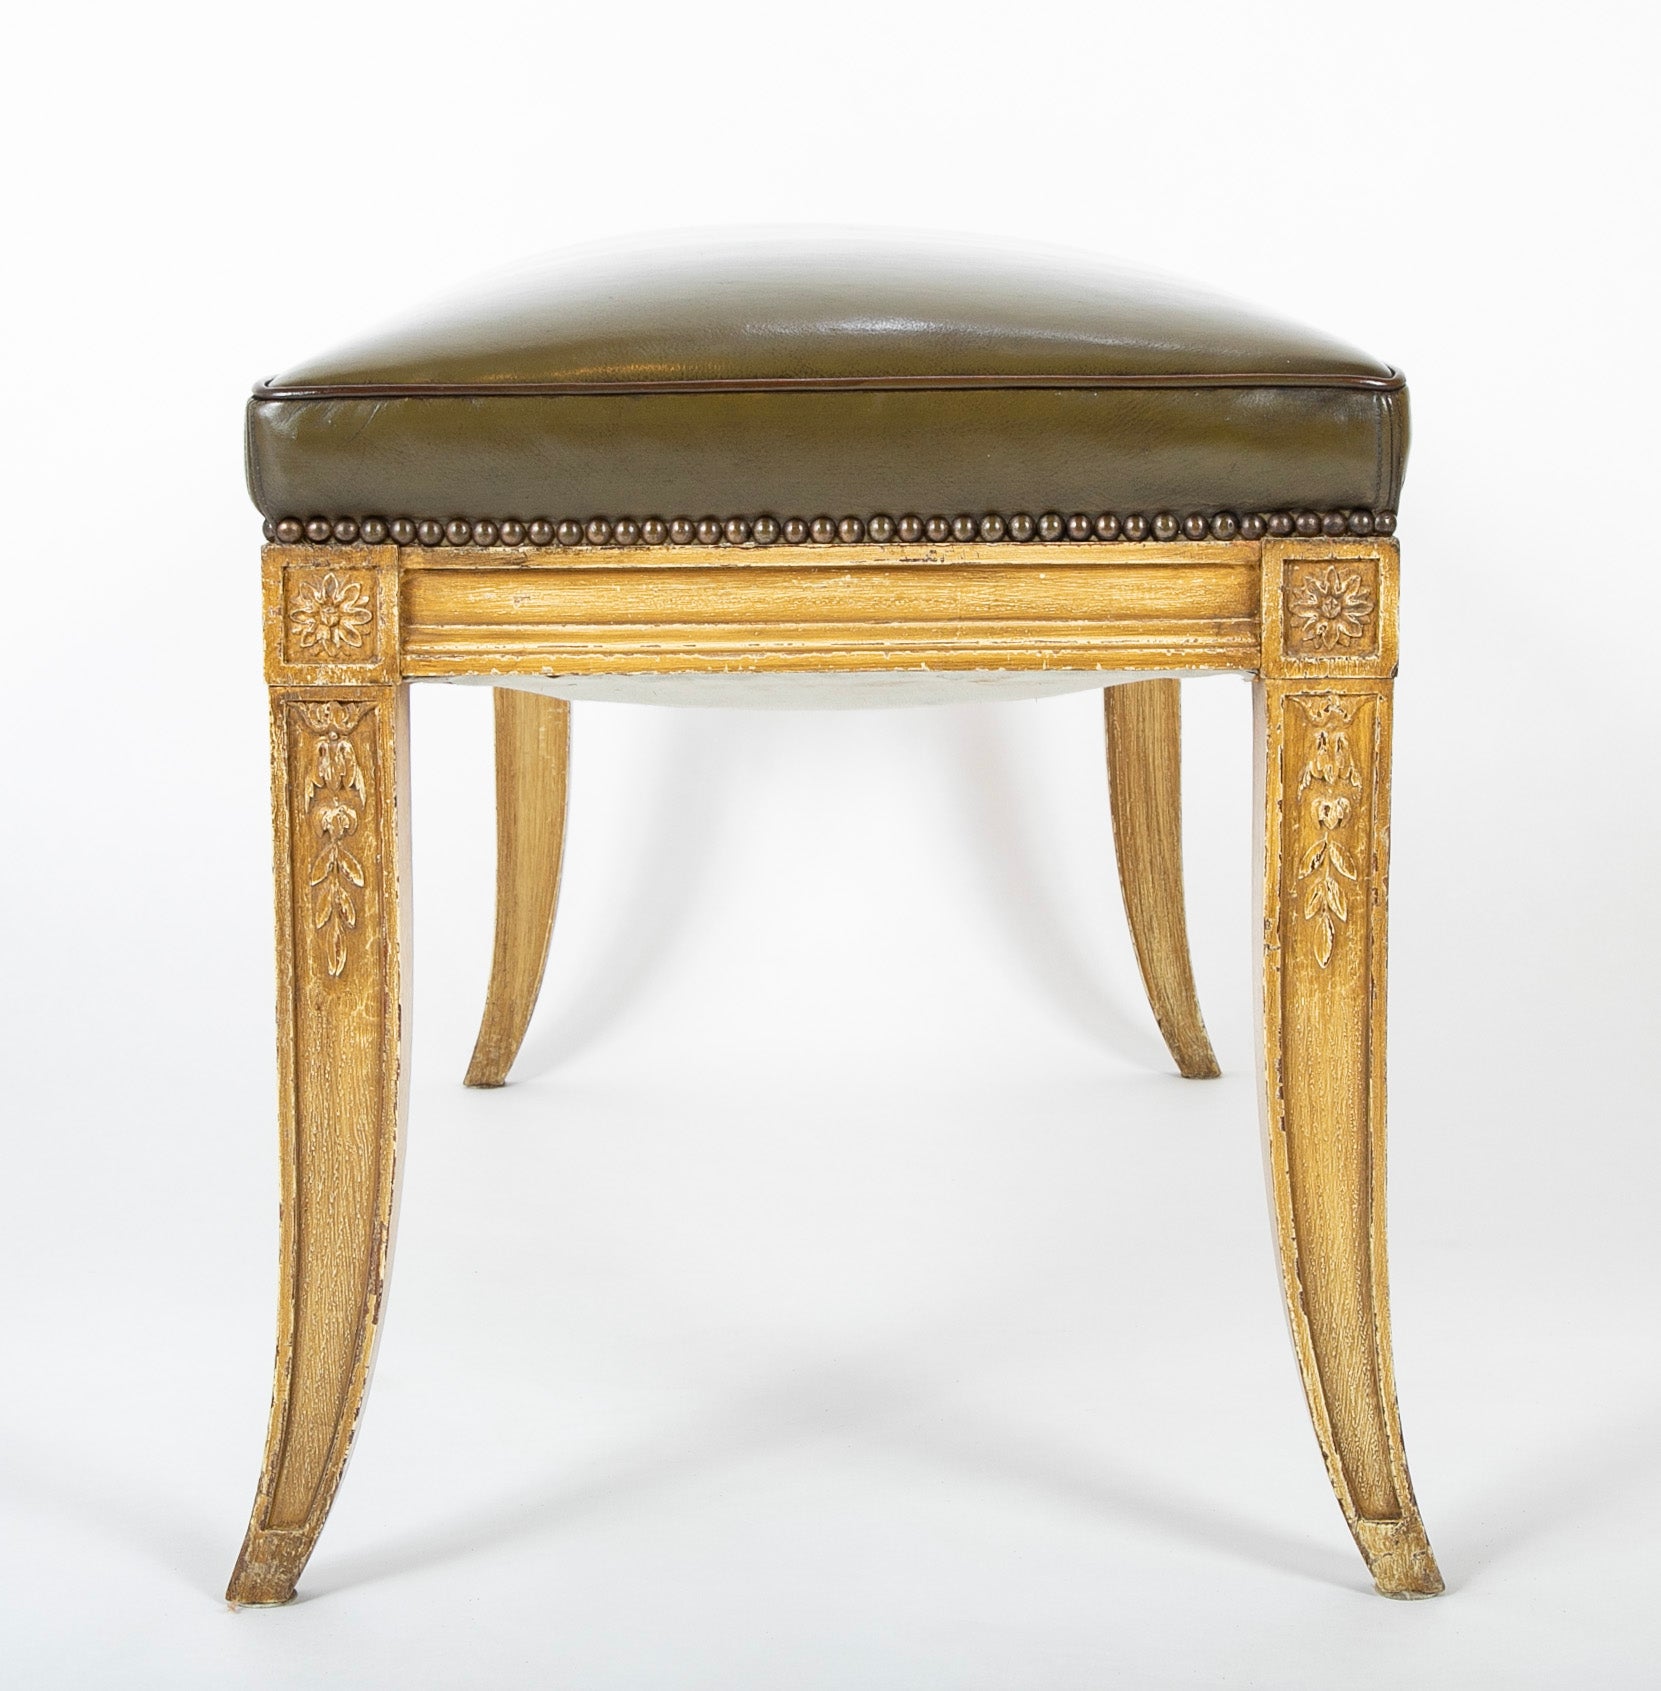 20th Century Directoire Style Carved Wood Bench with Leather Seat